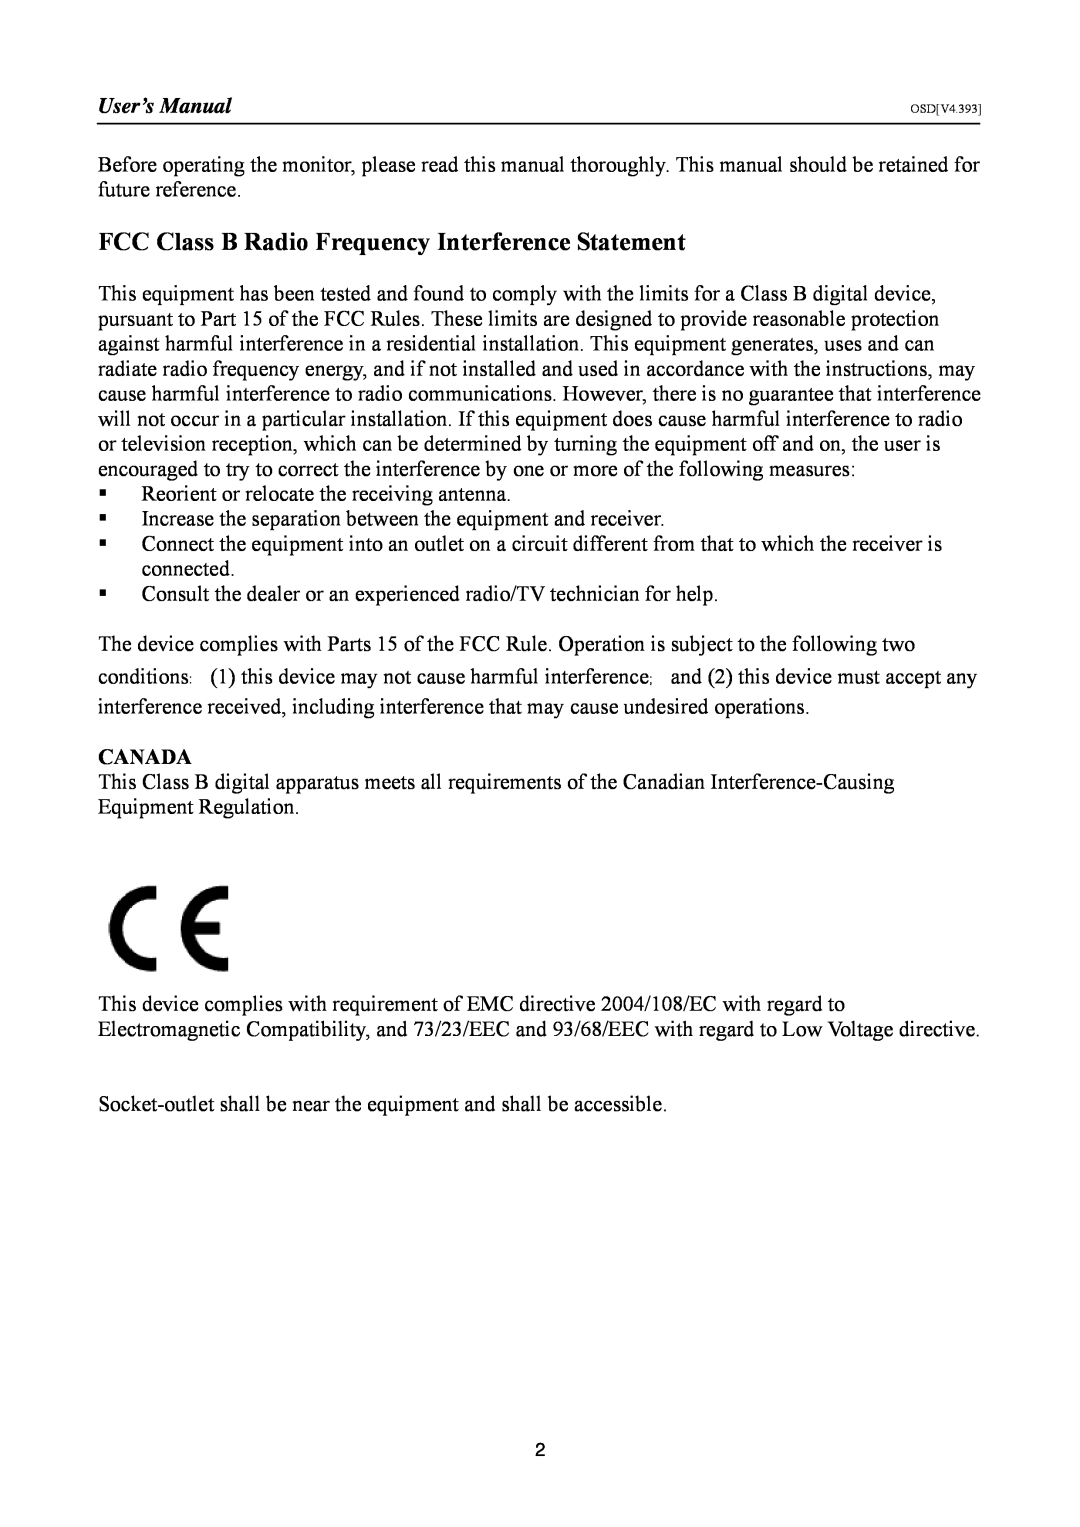 Hanns.G HL225, HSG 1147 manual FCC Class B Radio Frequency Interference Statement, User’s Manual, Canada 